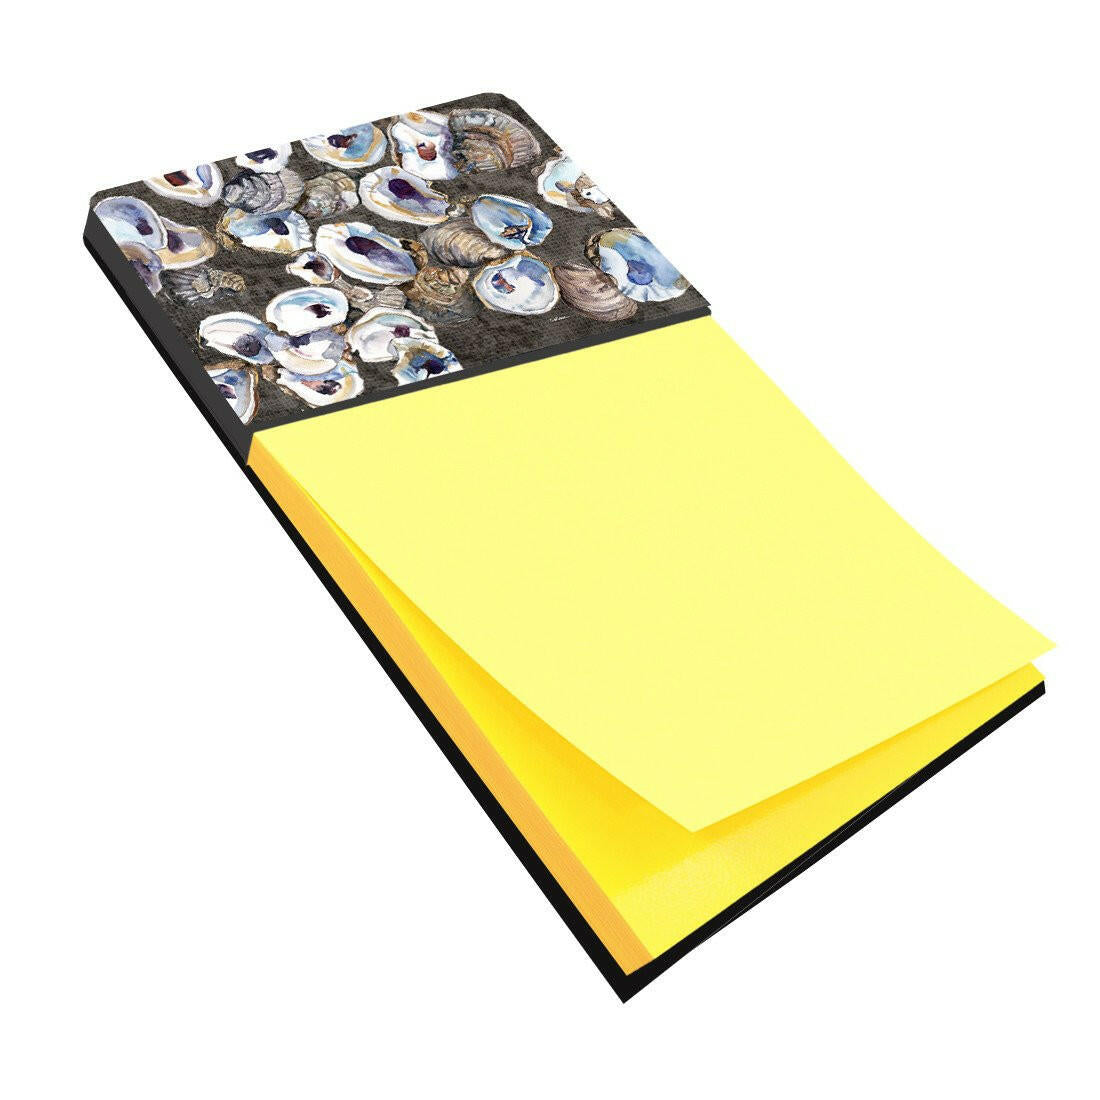 Oysters Refiillable Sticky Note Holder or Postit Note Dispenser 8789SN by Caroline's Treasures